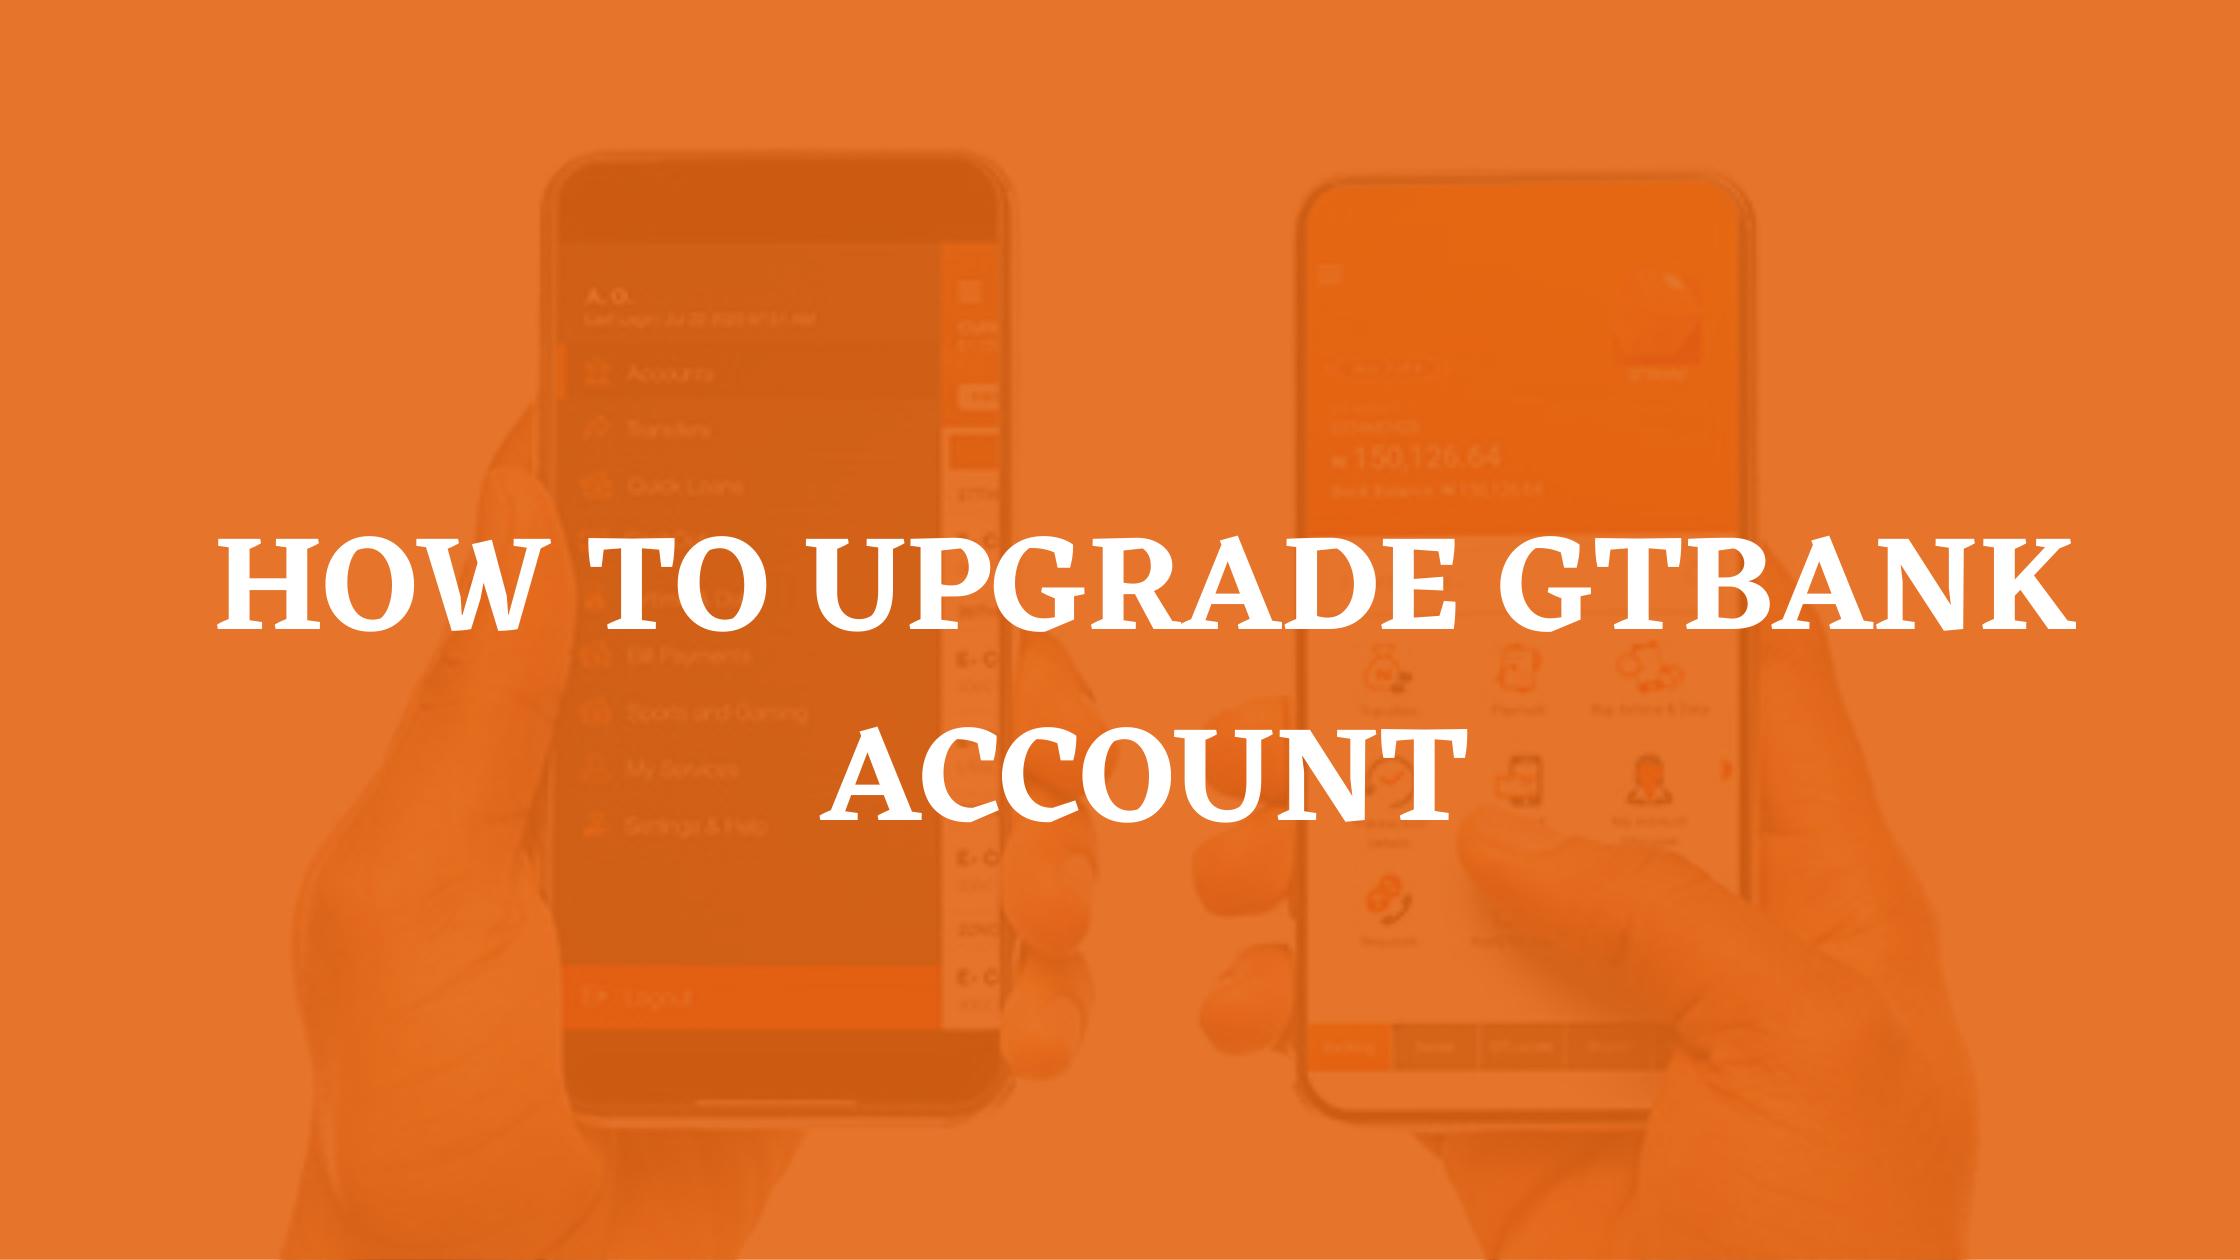 How to upgrade GTbank account